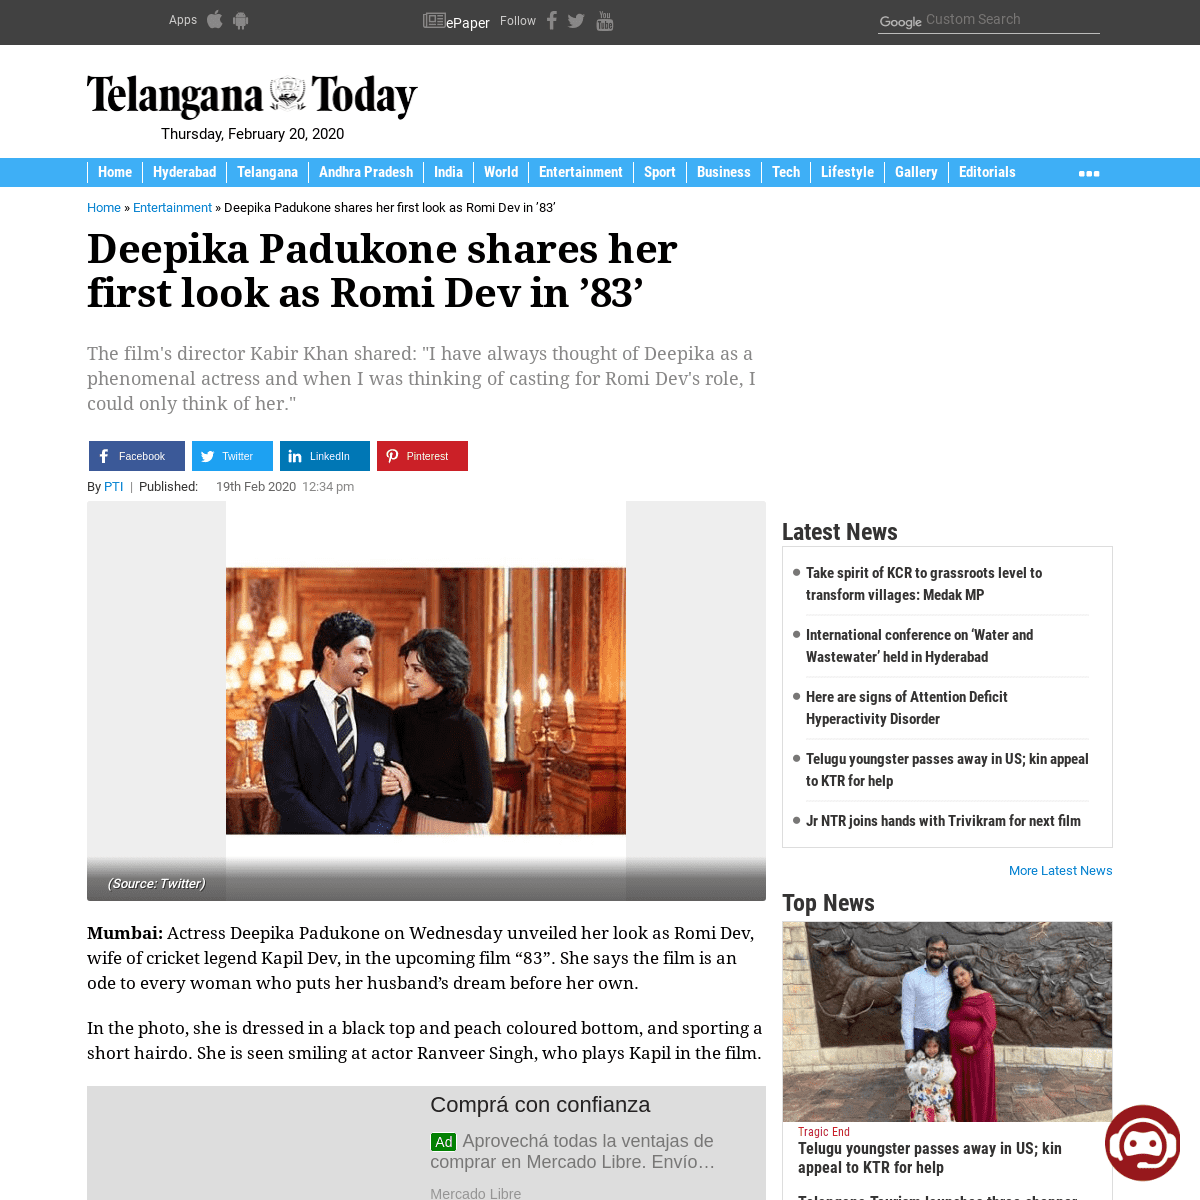 A complete backup of telanganatoday.com/deepika-padukone-shares-her-first-look-as-romi-dev-in-83